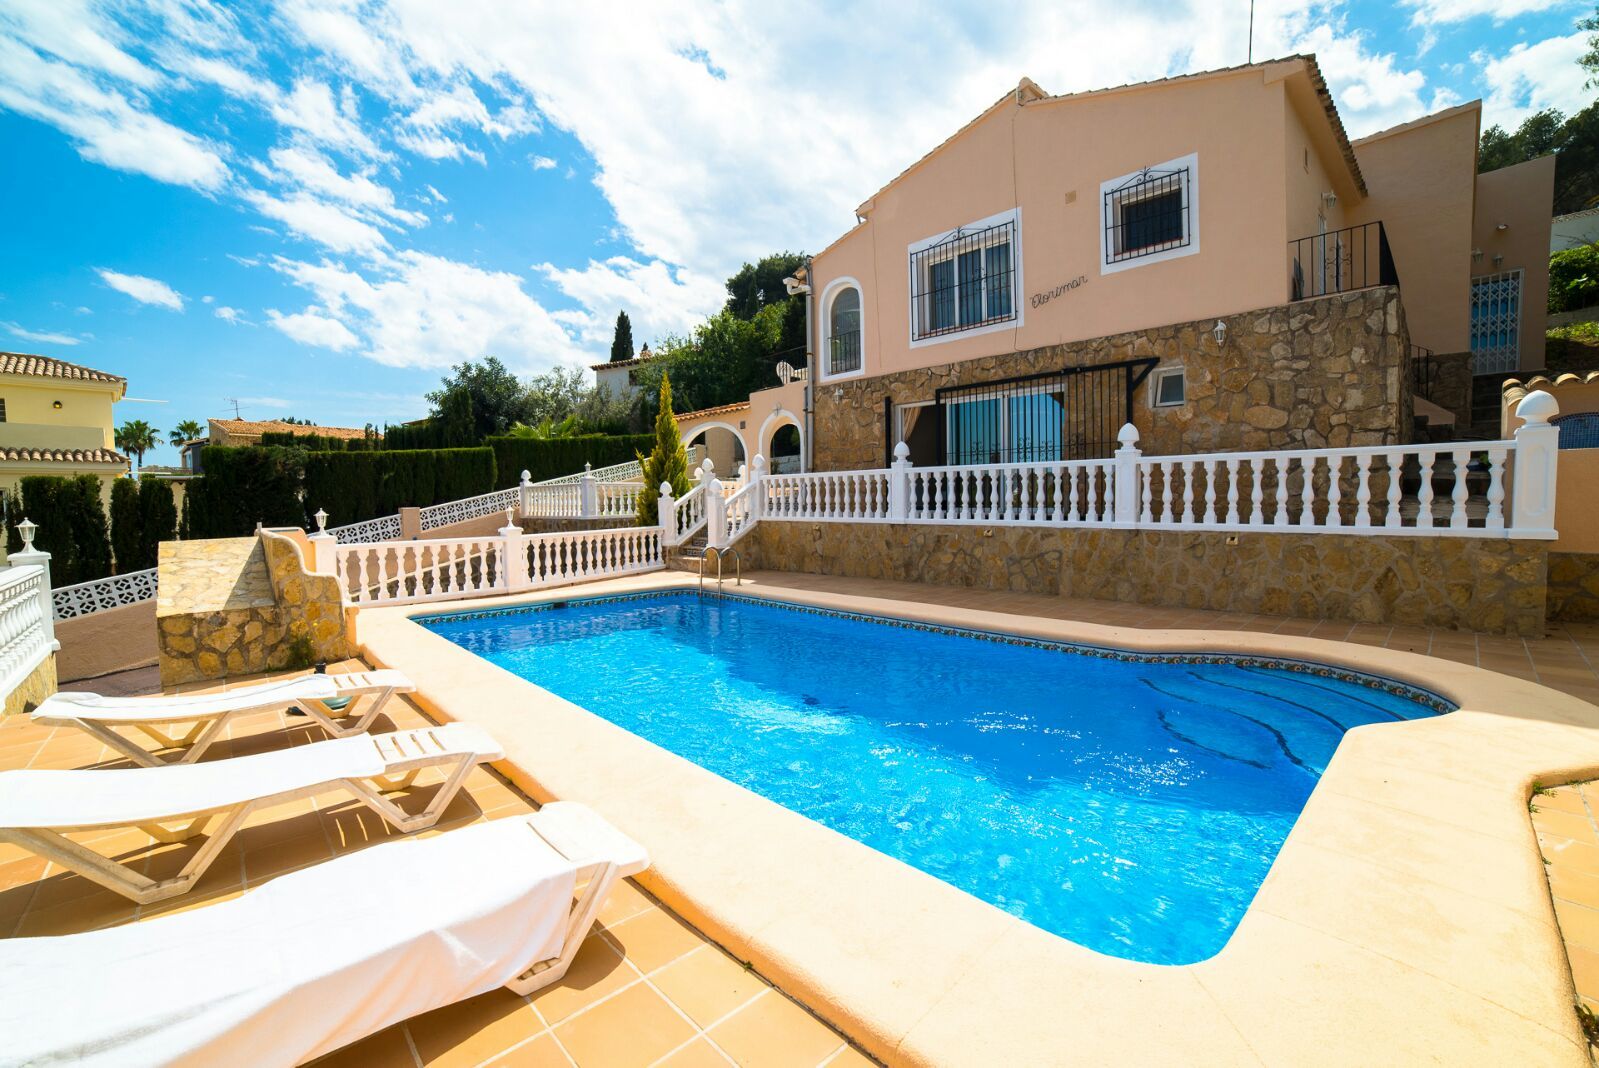 Villa for sale with sea views and swimming pool near the village.